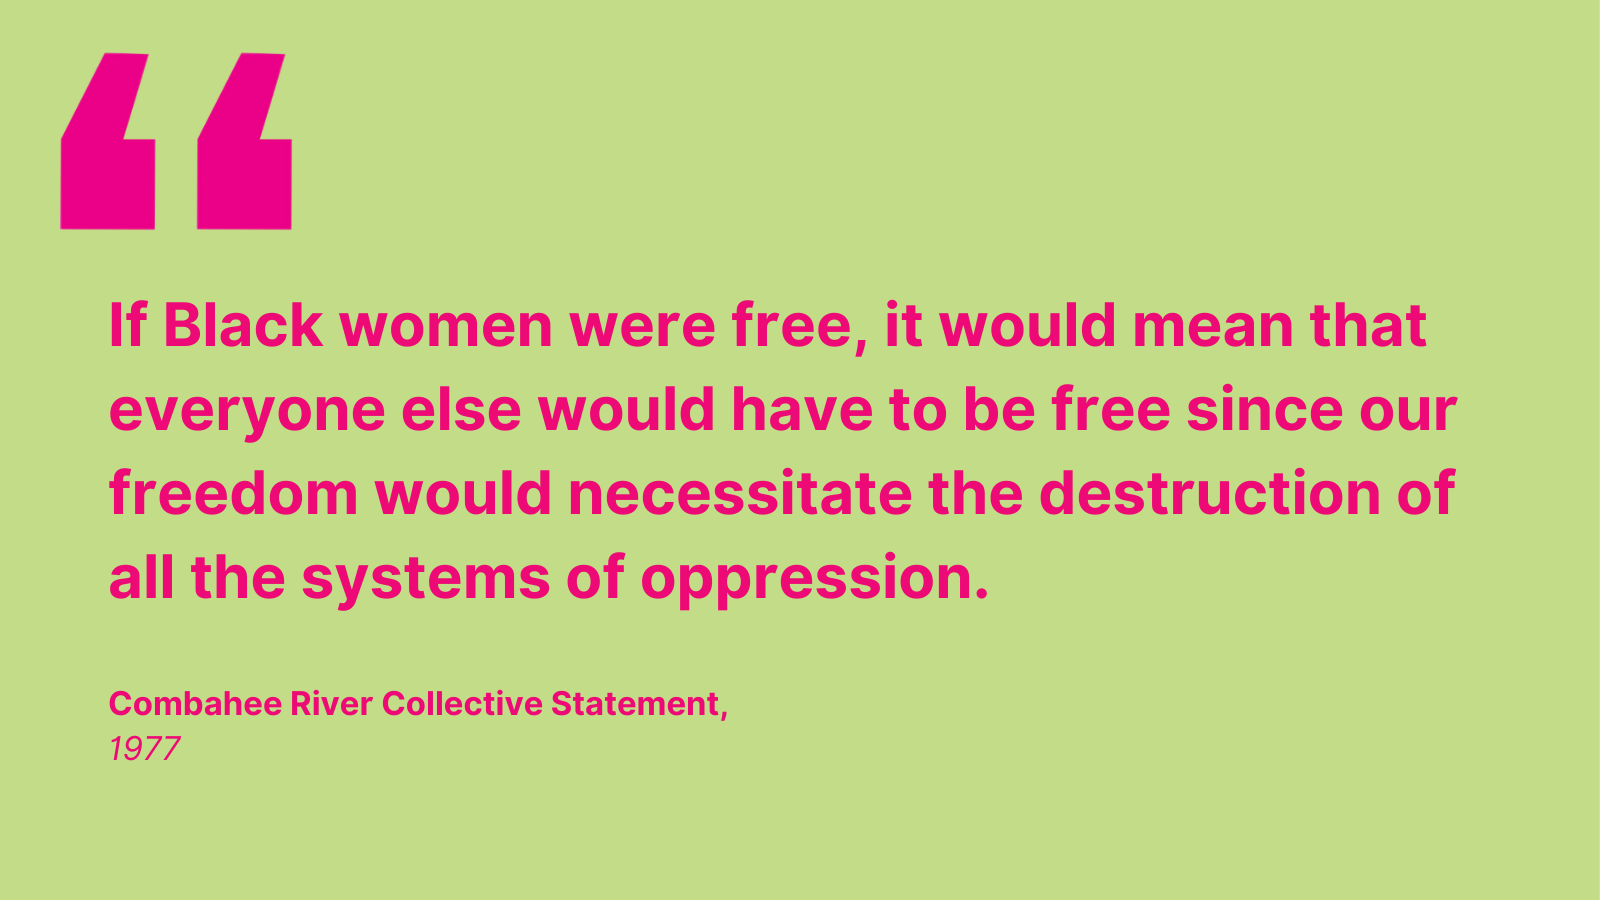 "If Black women were free, it would mean that everyone else would have to be free since our freedom would necessitate the destruction of all the systems of oppression." - Combahee River Collective Statement, 1977